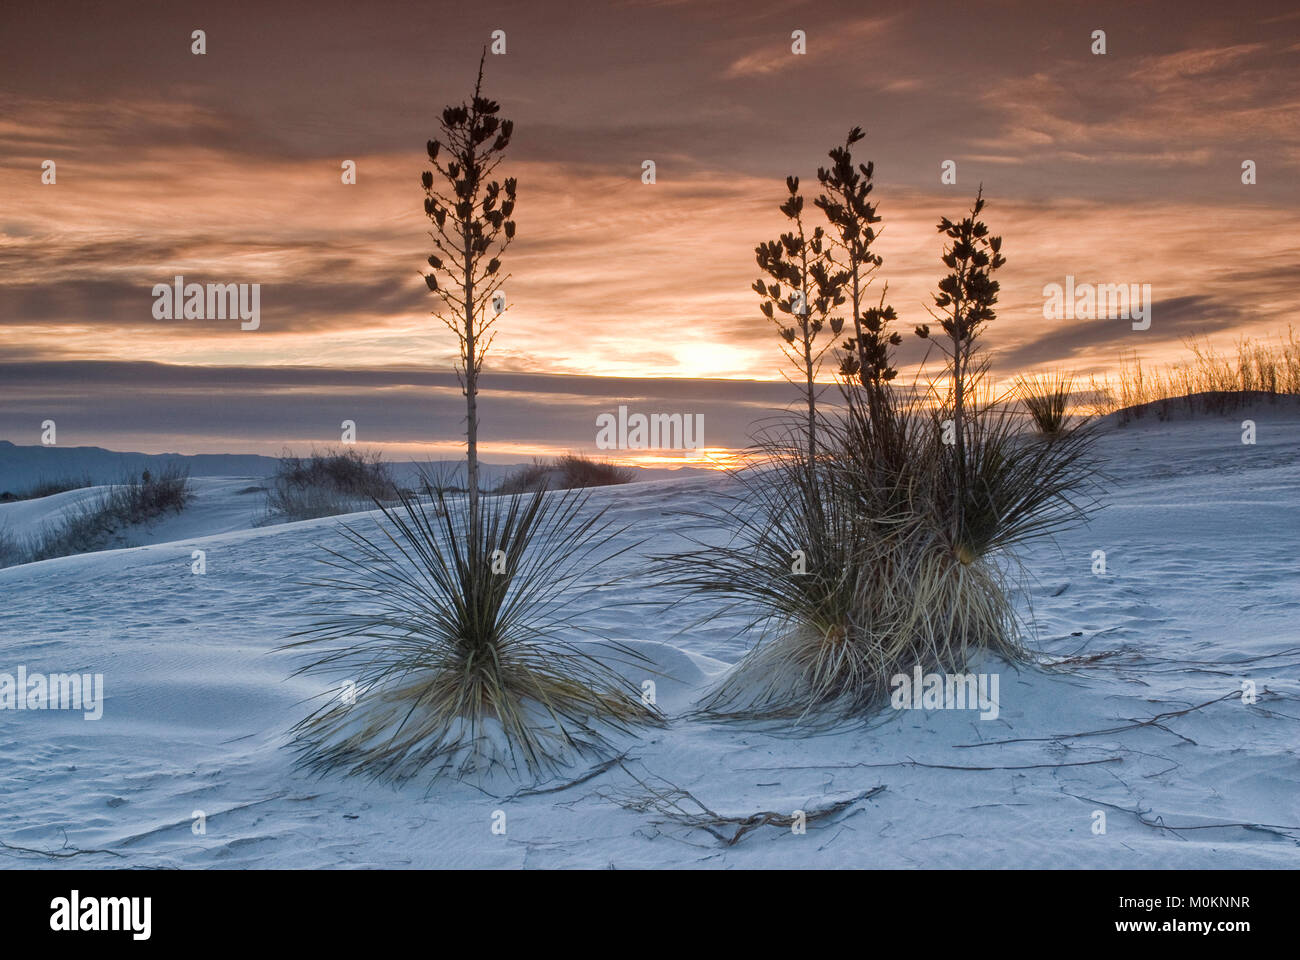 Soaptree yuccas on gypsum dunes at sunrise in White Sands National Monument, New Mexico, USA Stock Photo